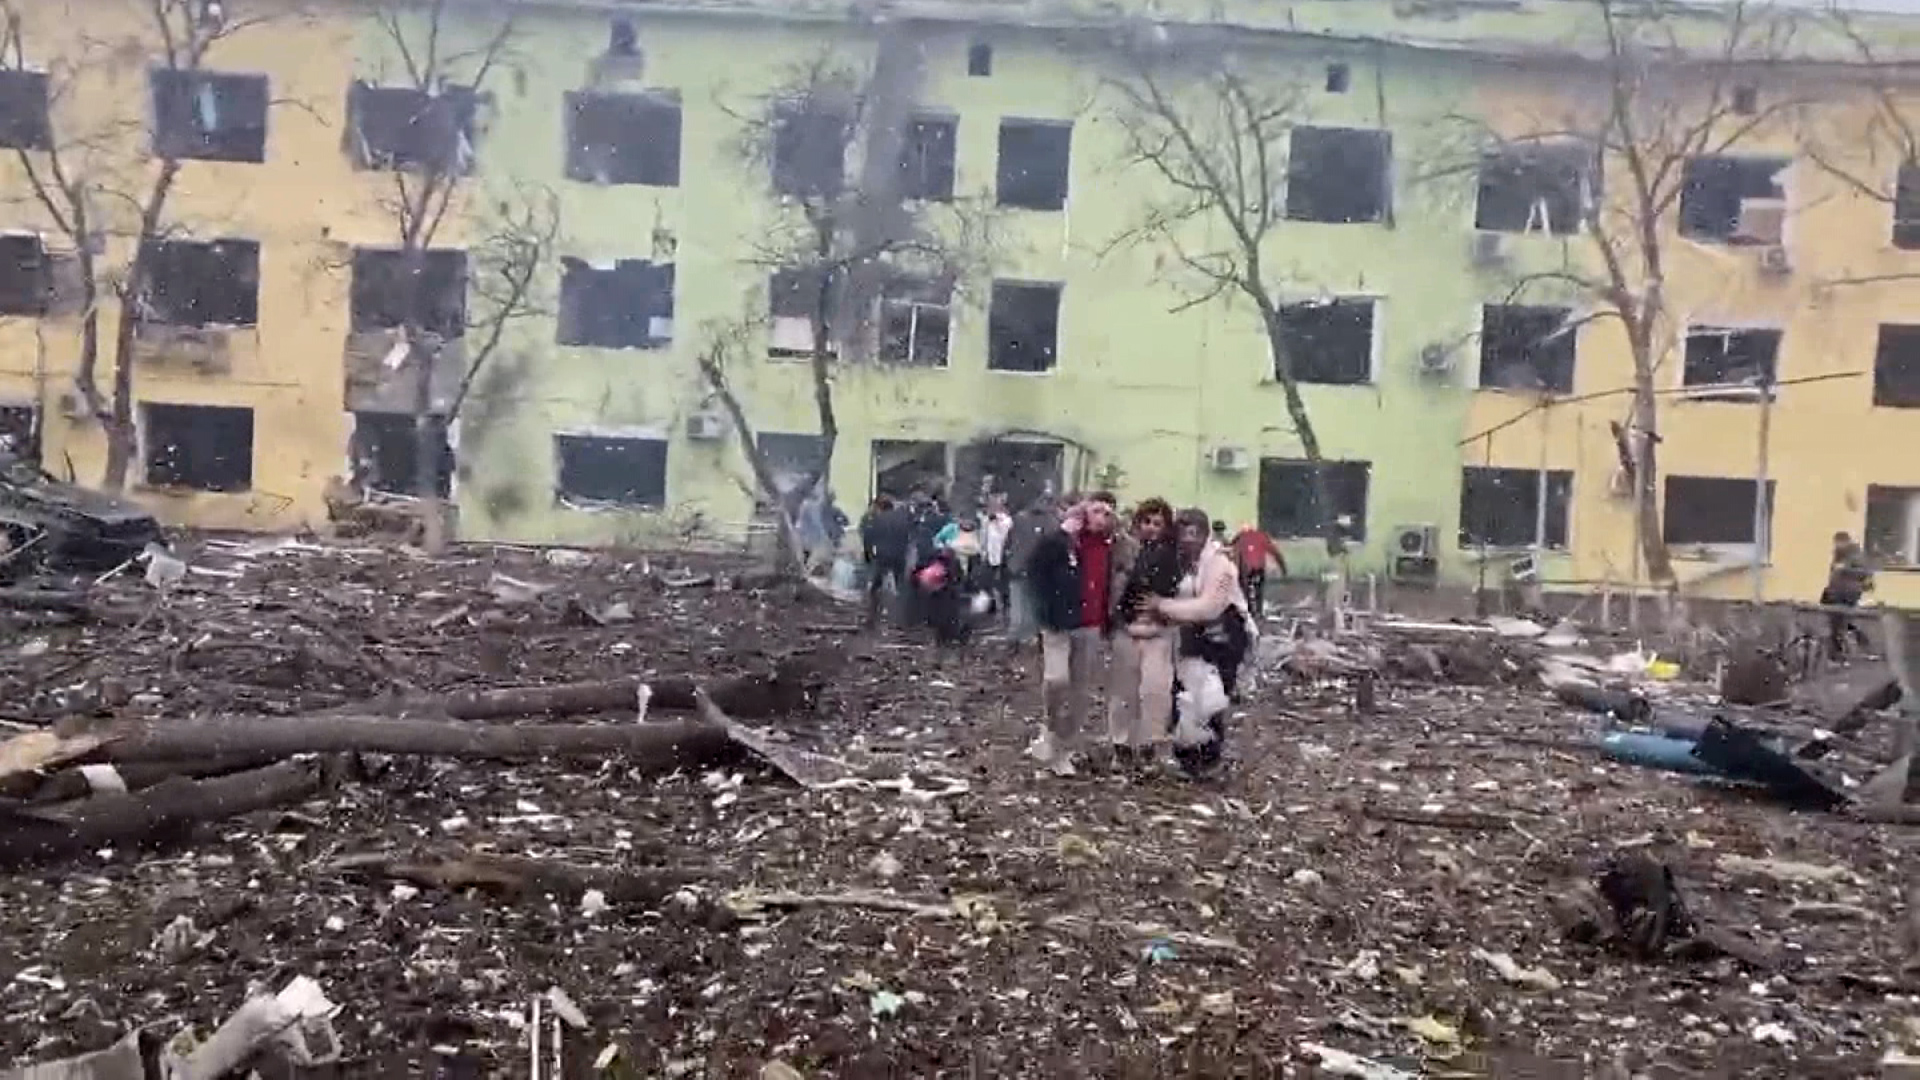 People are assisted as they leave a building at the site of a bombing at a hospital in Mariupol.